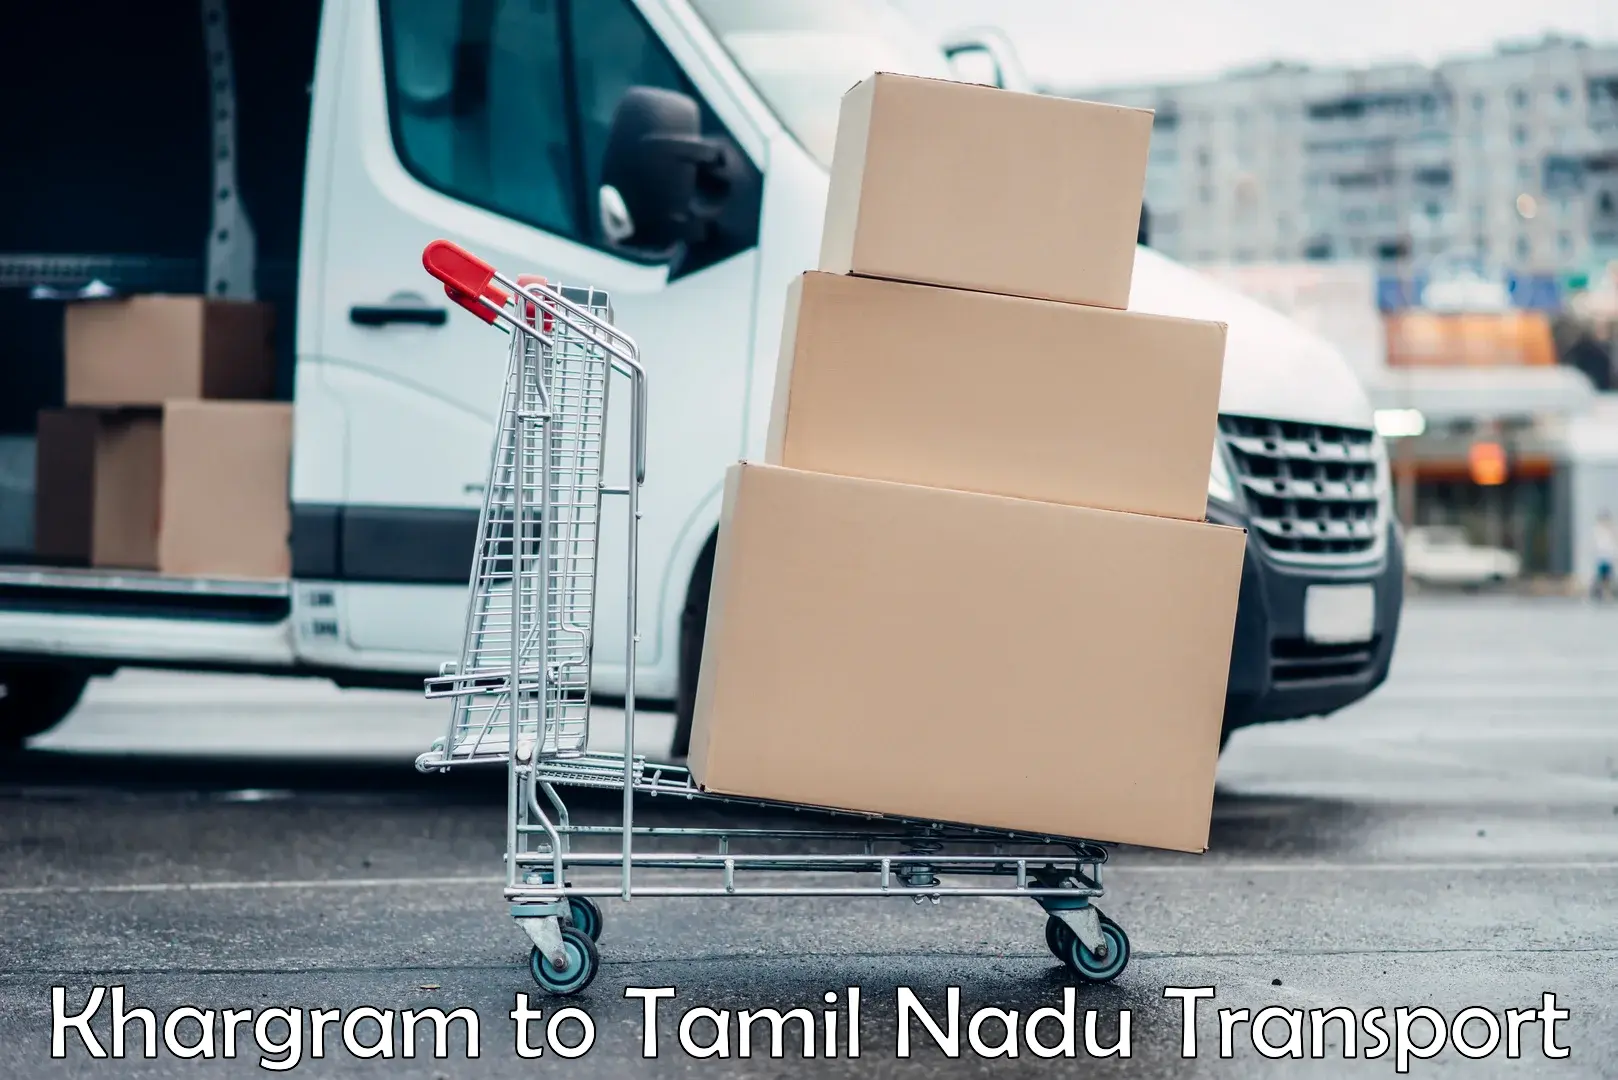 Daily parcel service transport Khargram to Vellore